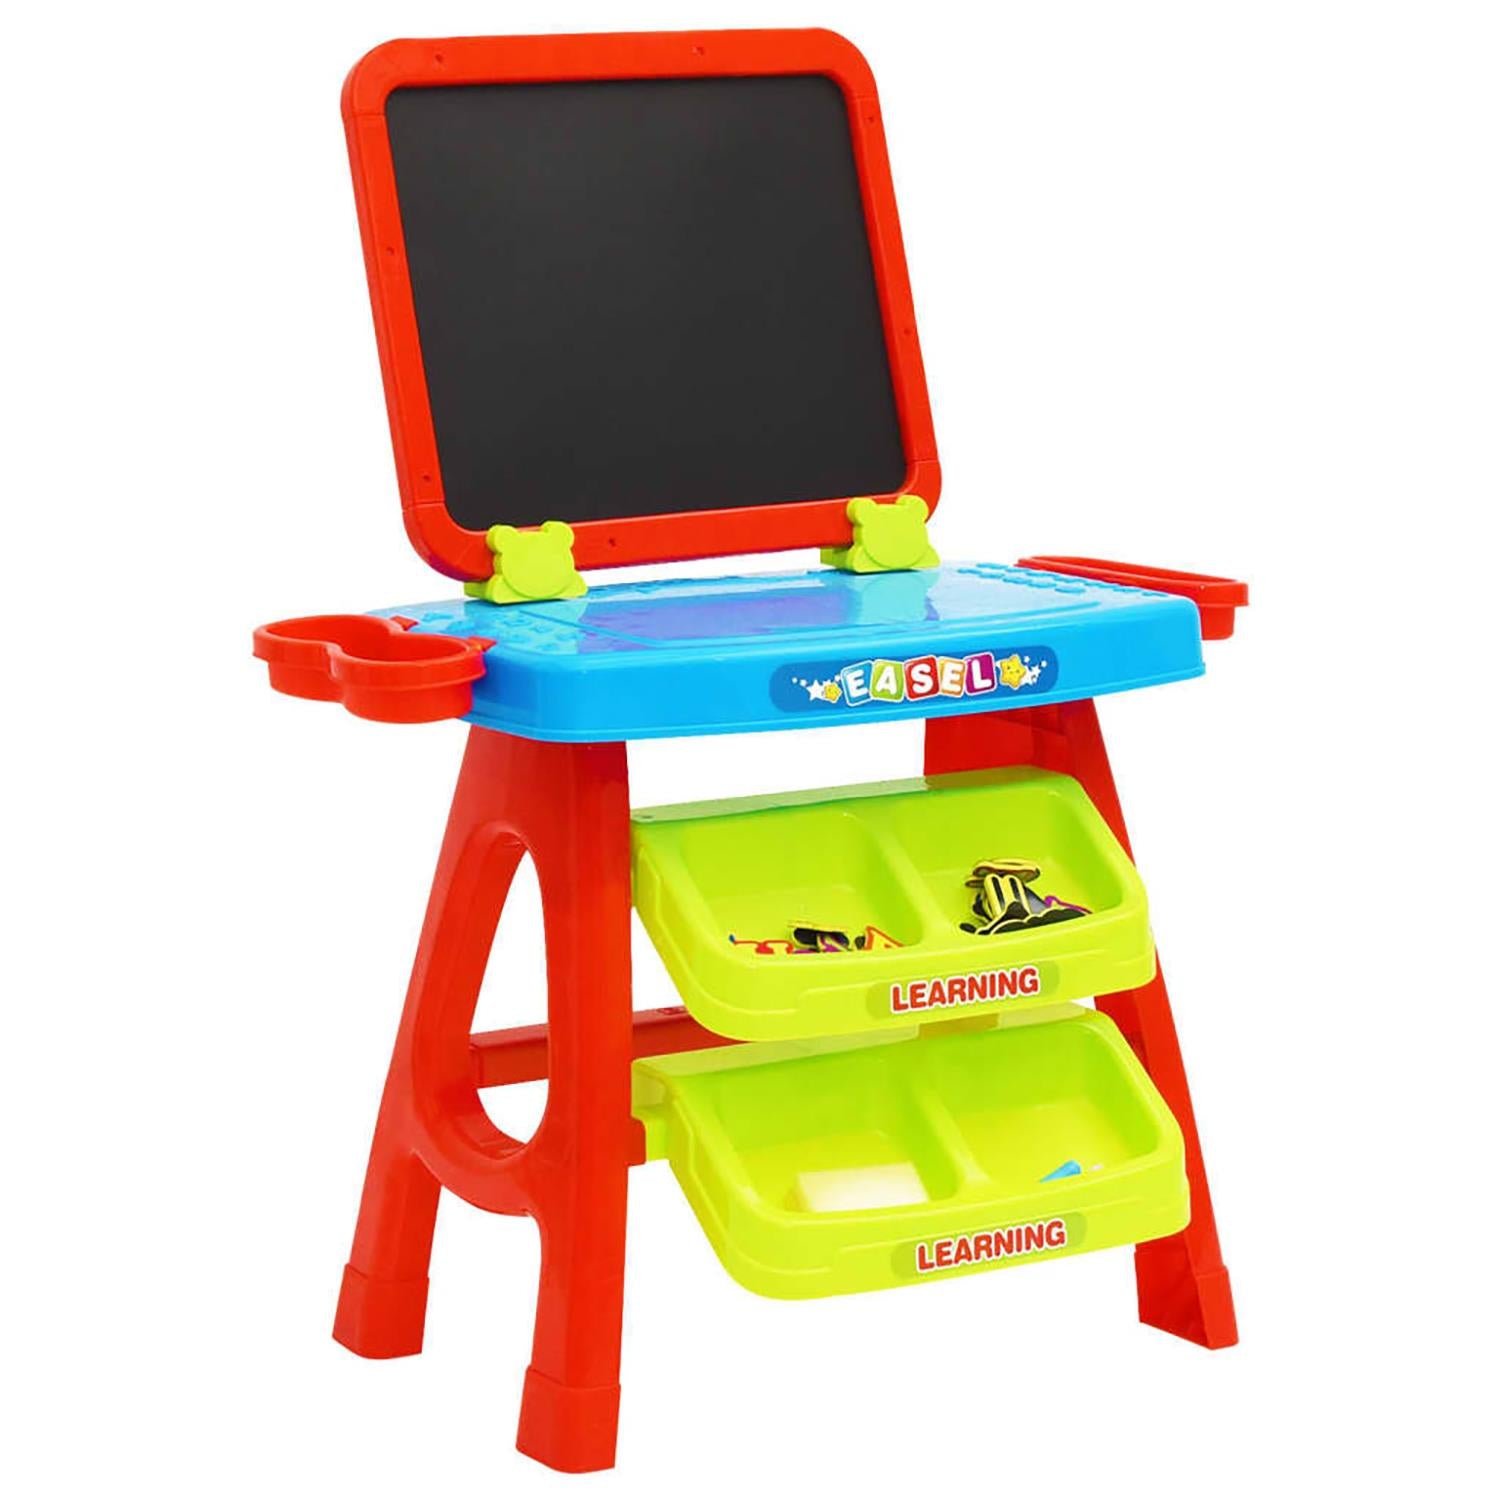 Learning Desk & Magnetic Easel Chalkboard by The Magic Toy Shop - The Magic Toy Shop